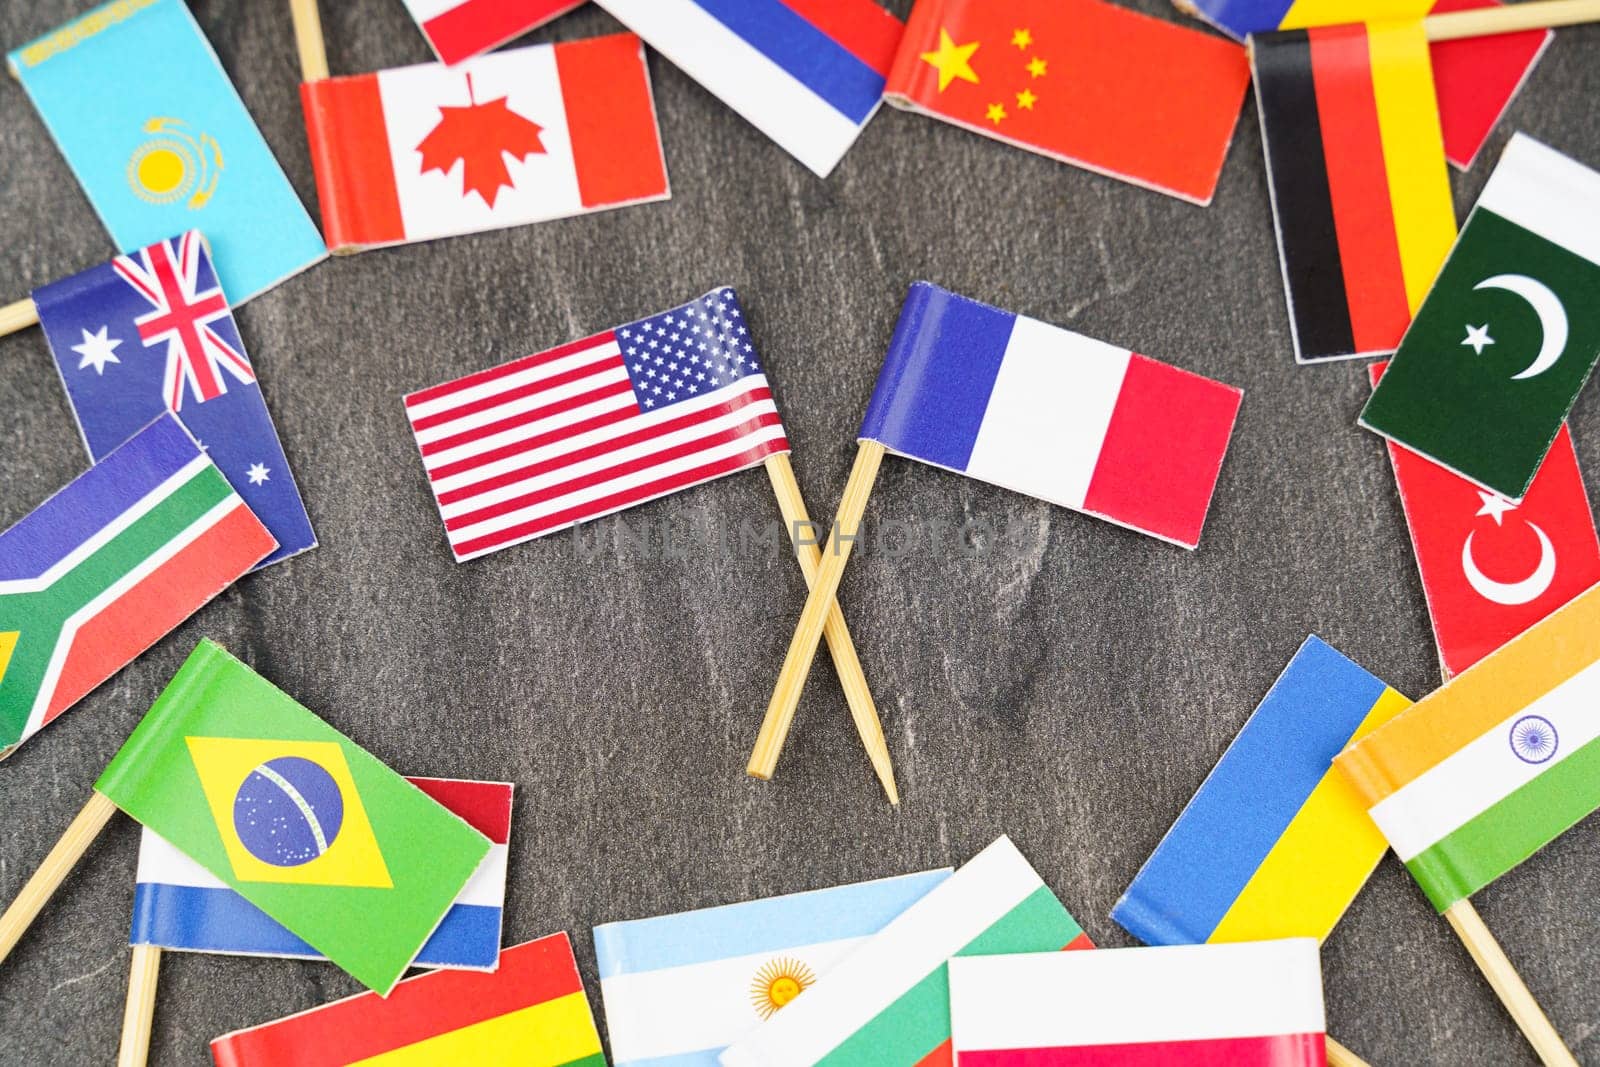 Policy. National flags of different countries. The concept is diplomacy. In the middle among the various flags are two flags - USA, France